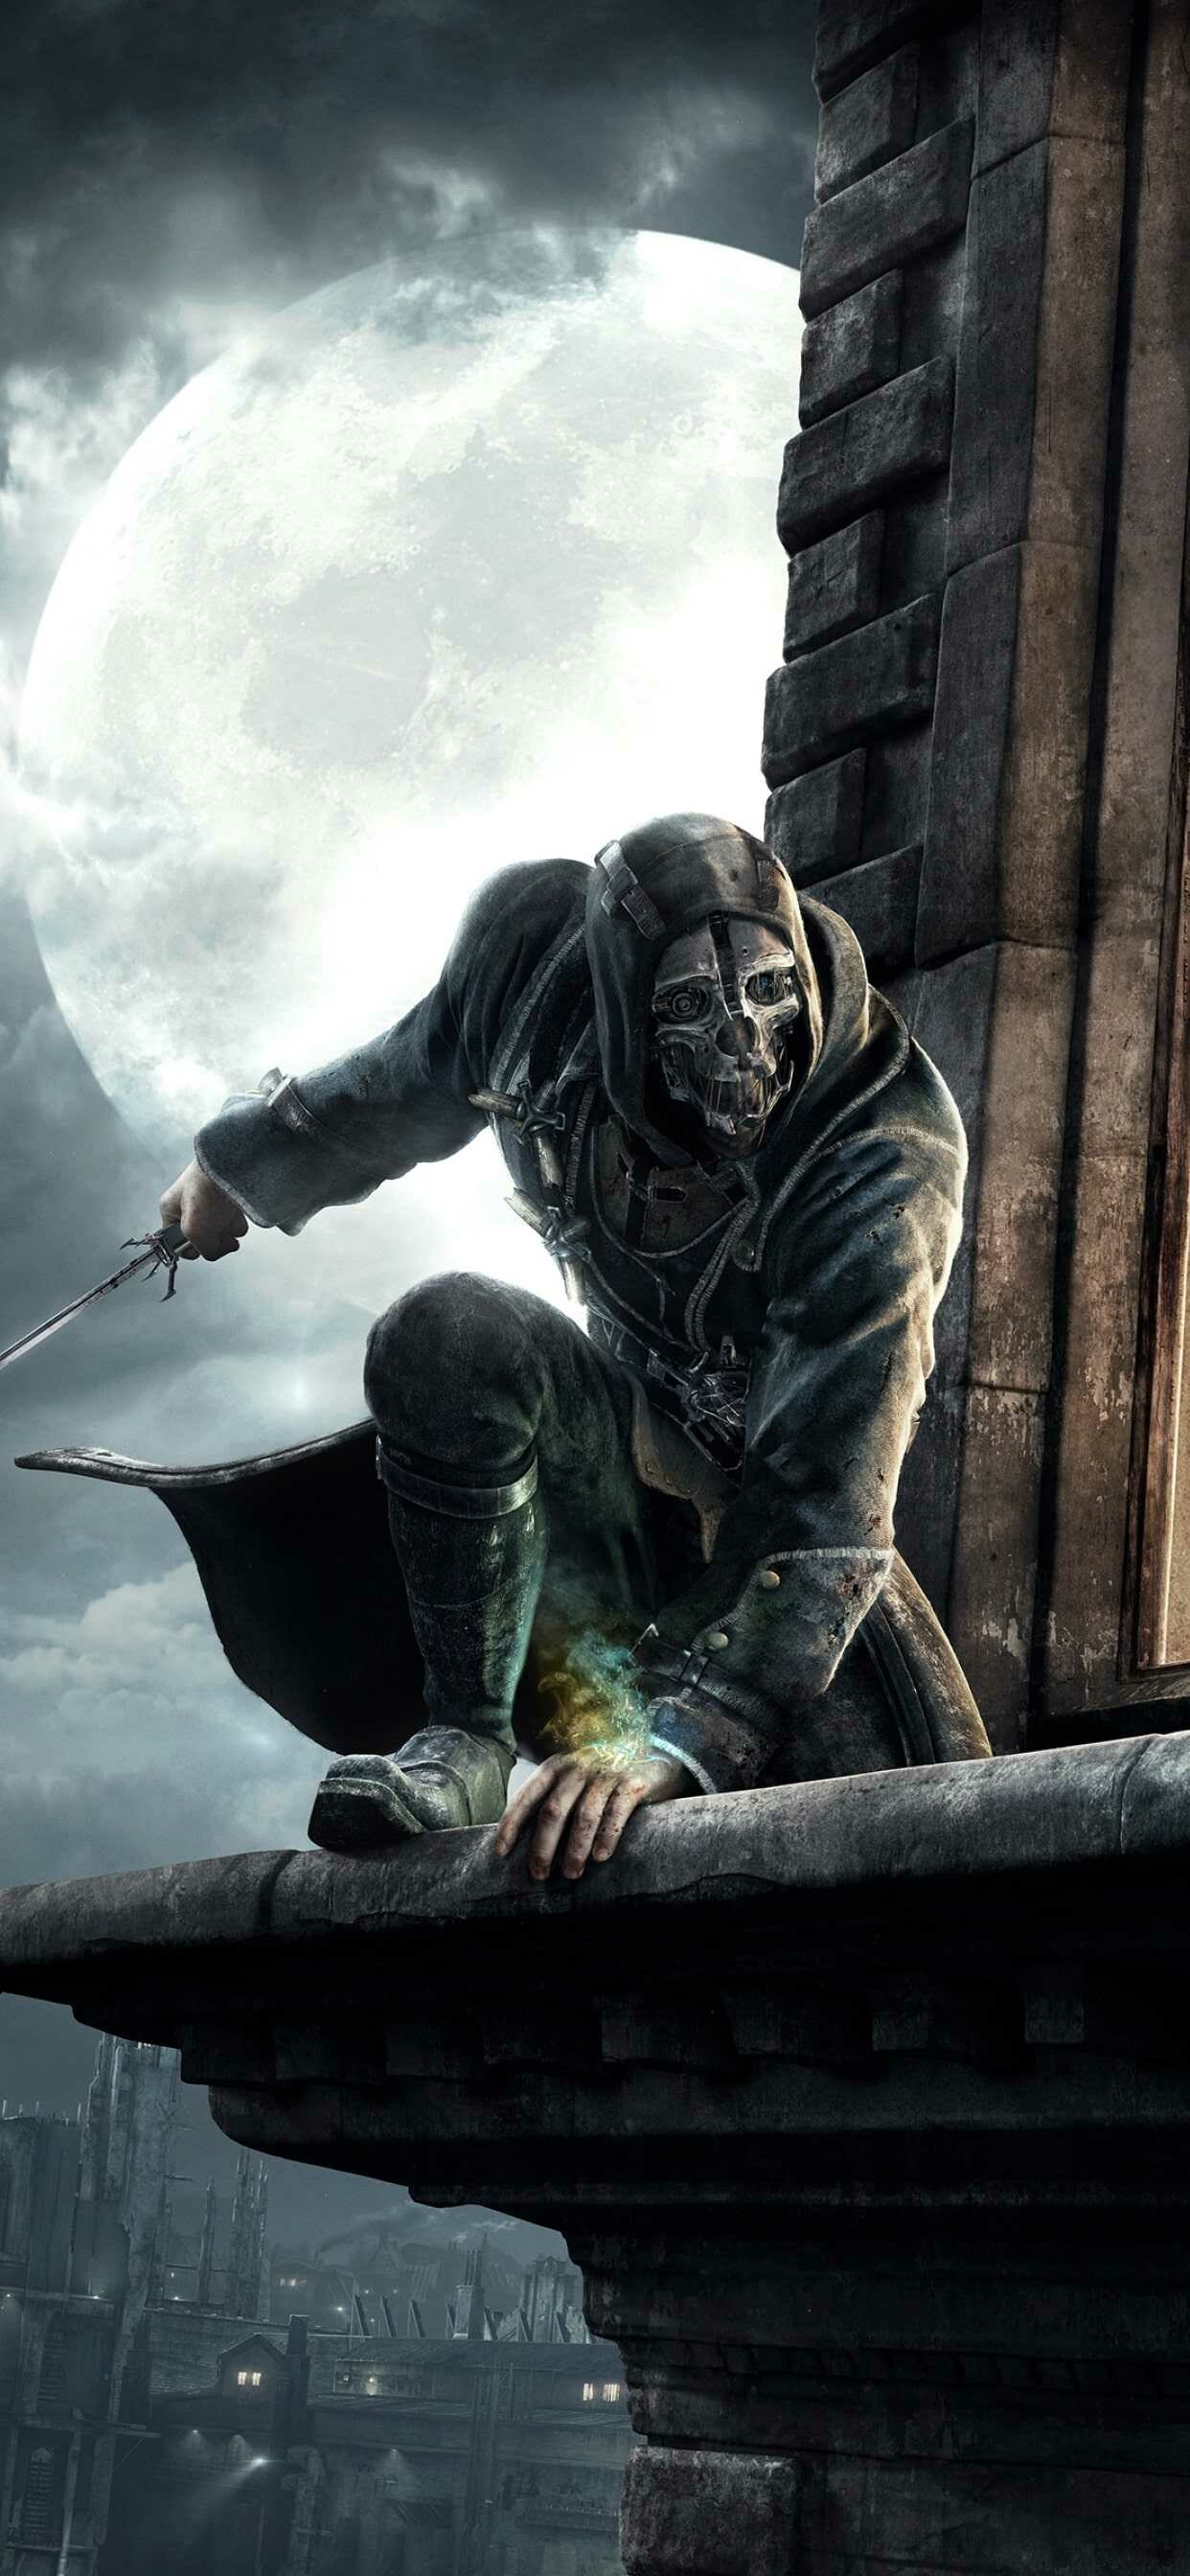 Dishonored: Corvo Attano, One of two playable protagonists. 1250x2690 HD Background.